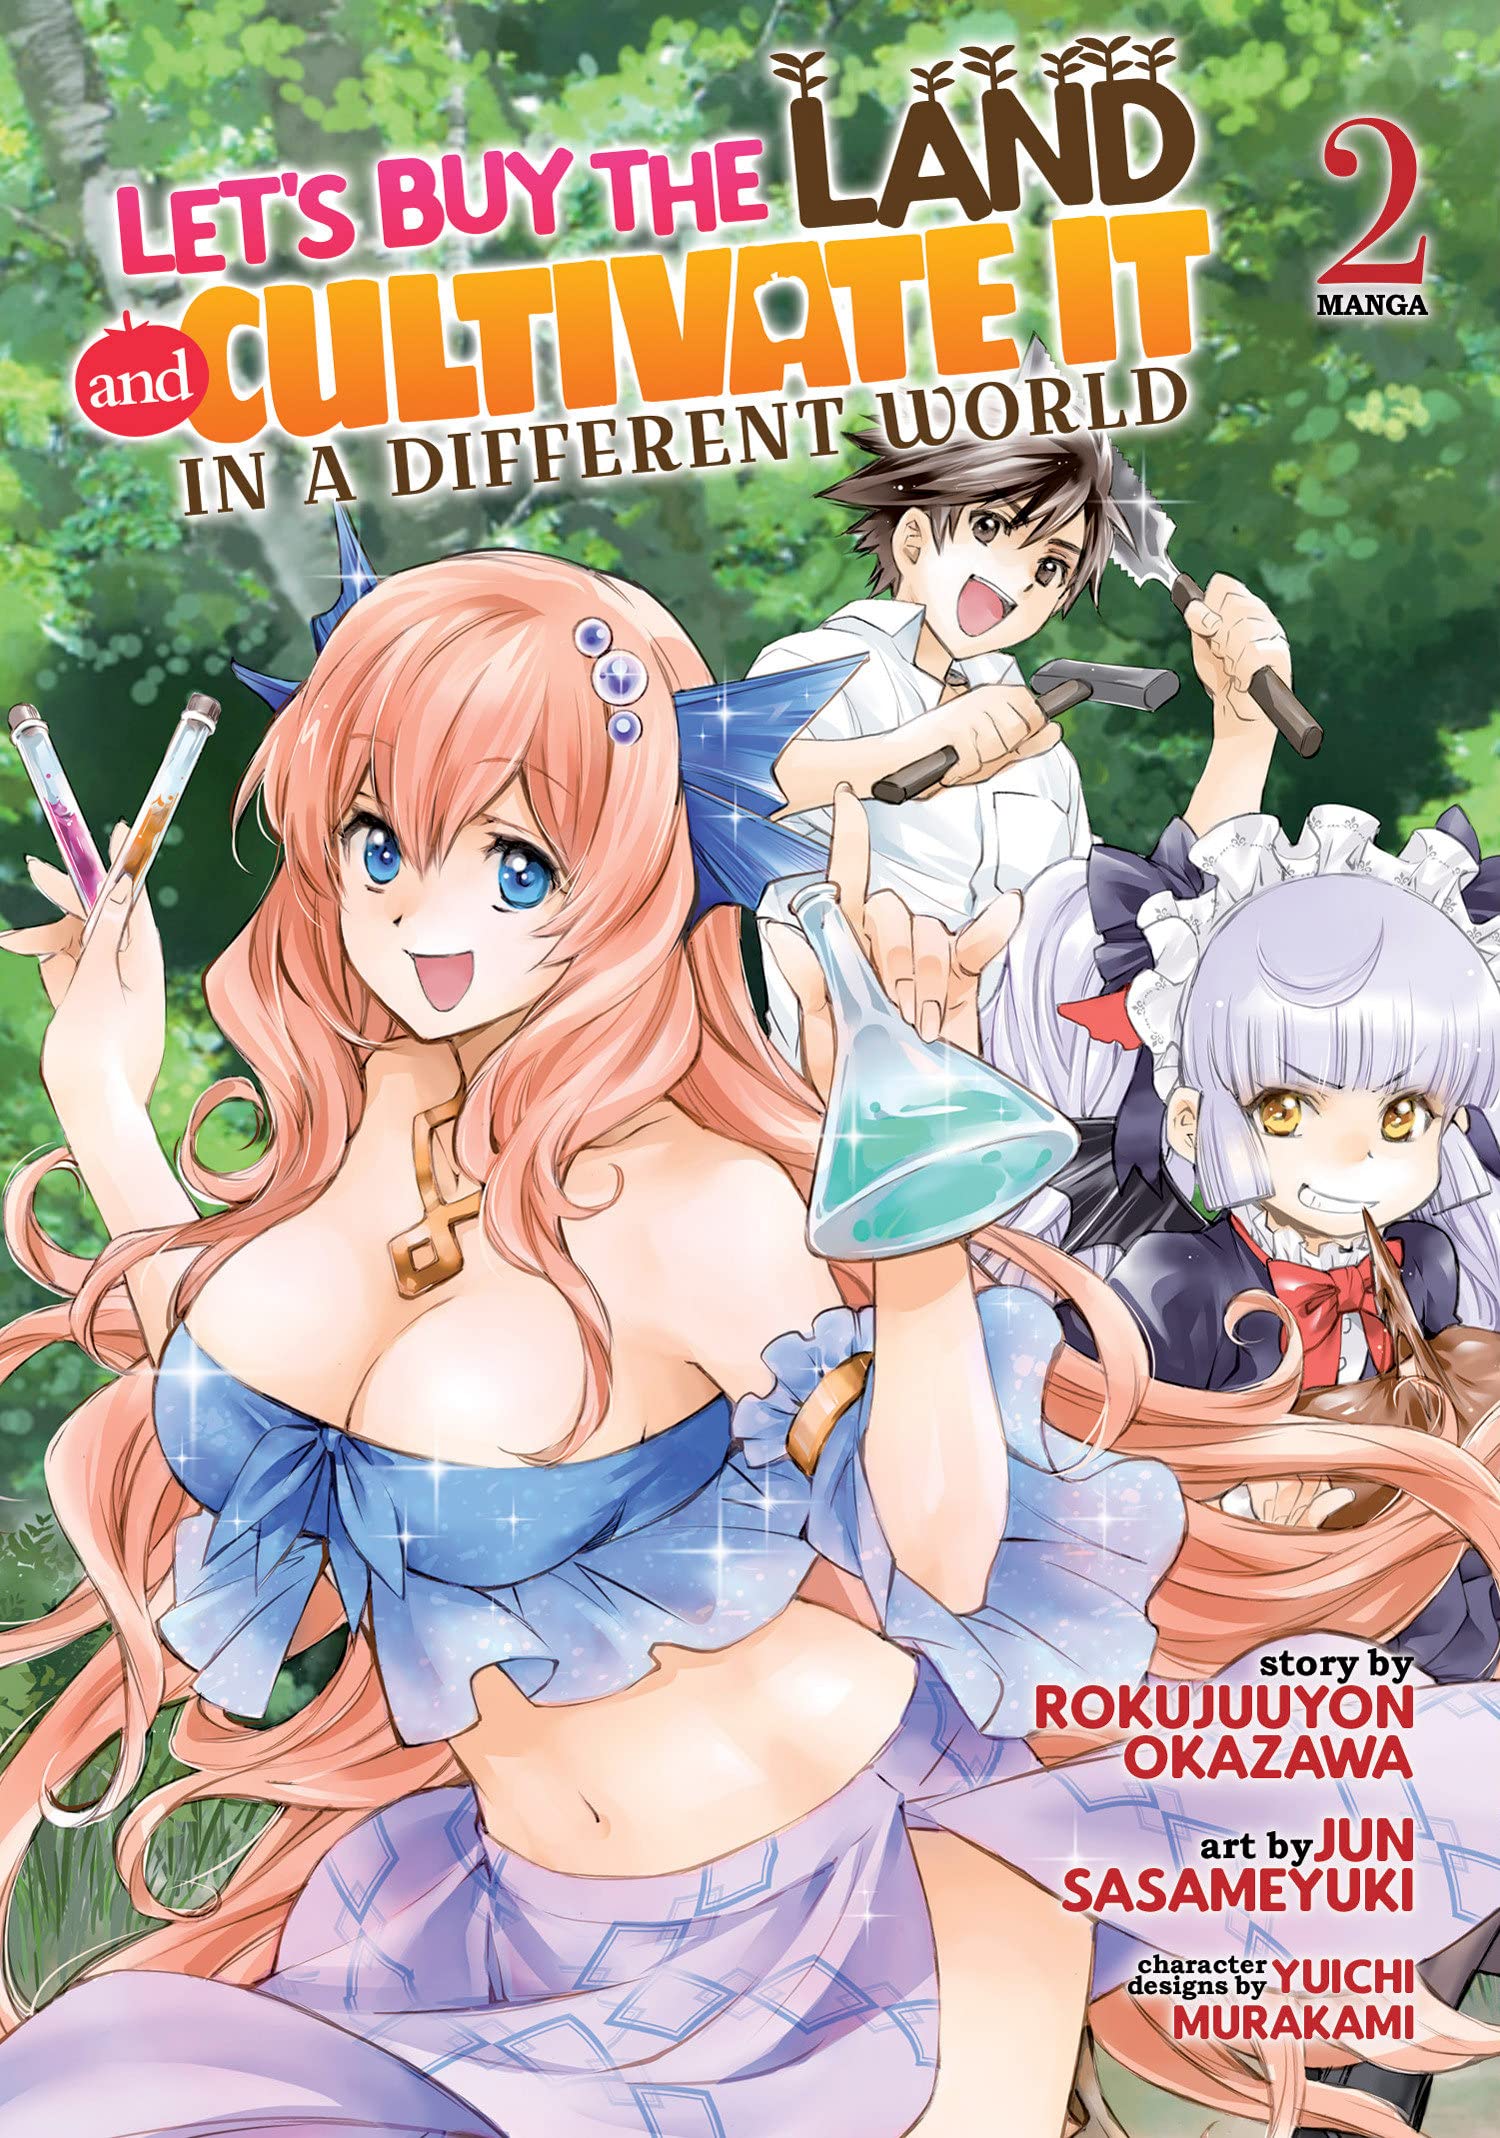 Let's Buy the Land and Cultivate It in a Different World (Manga) Vol. 02